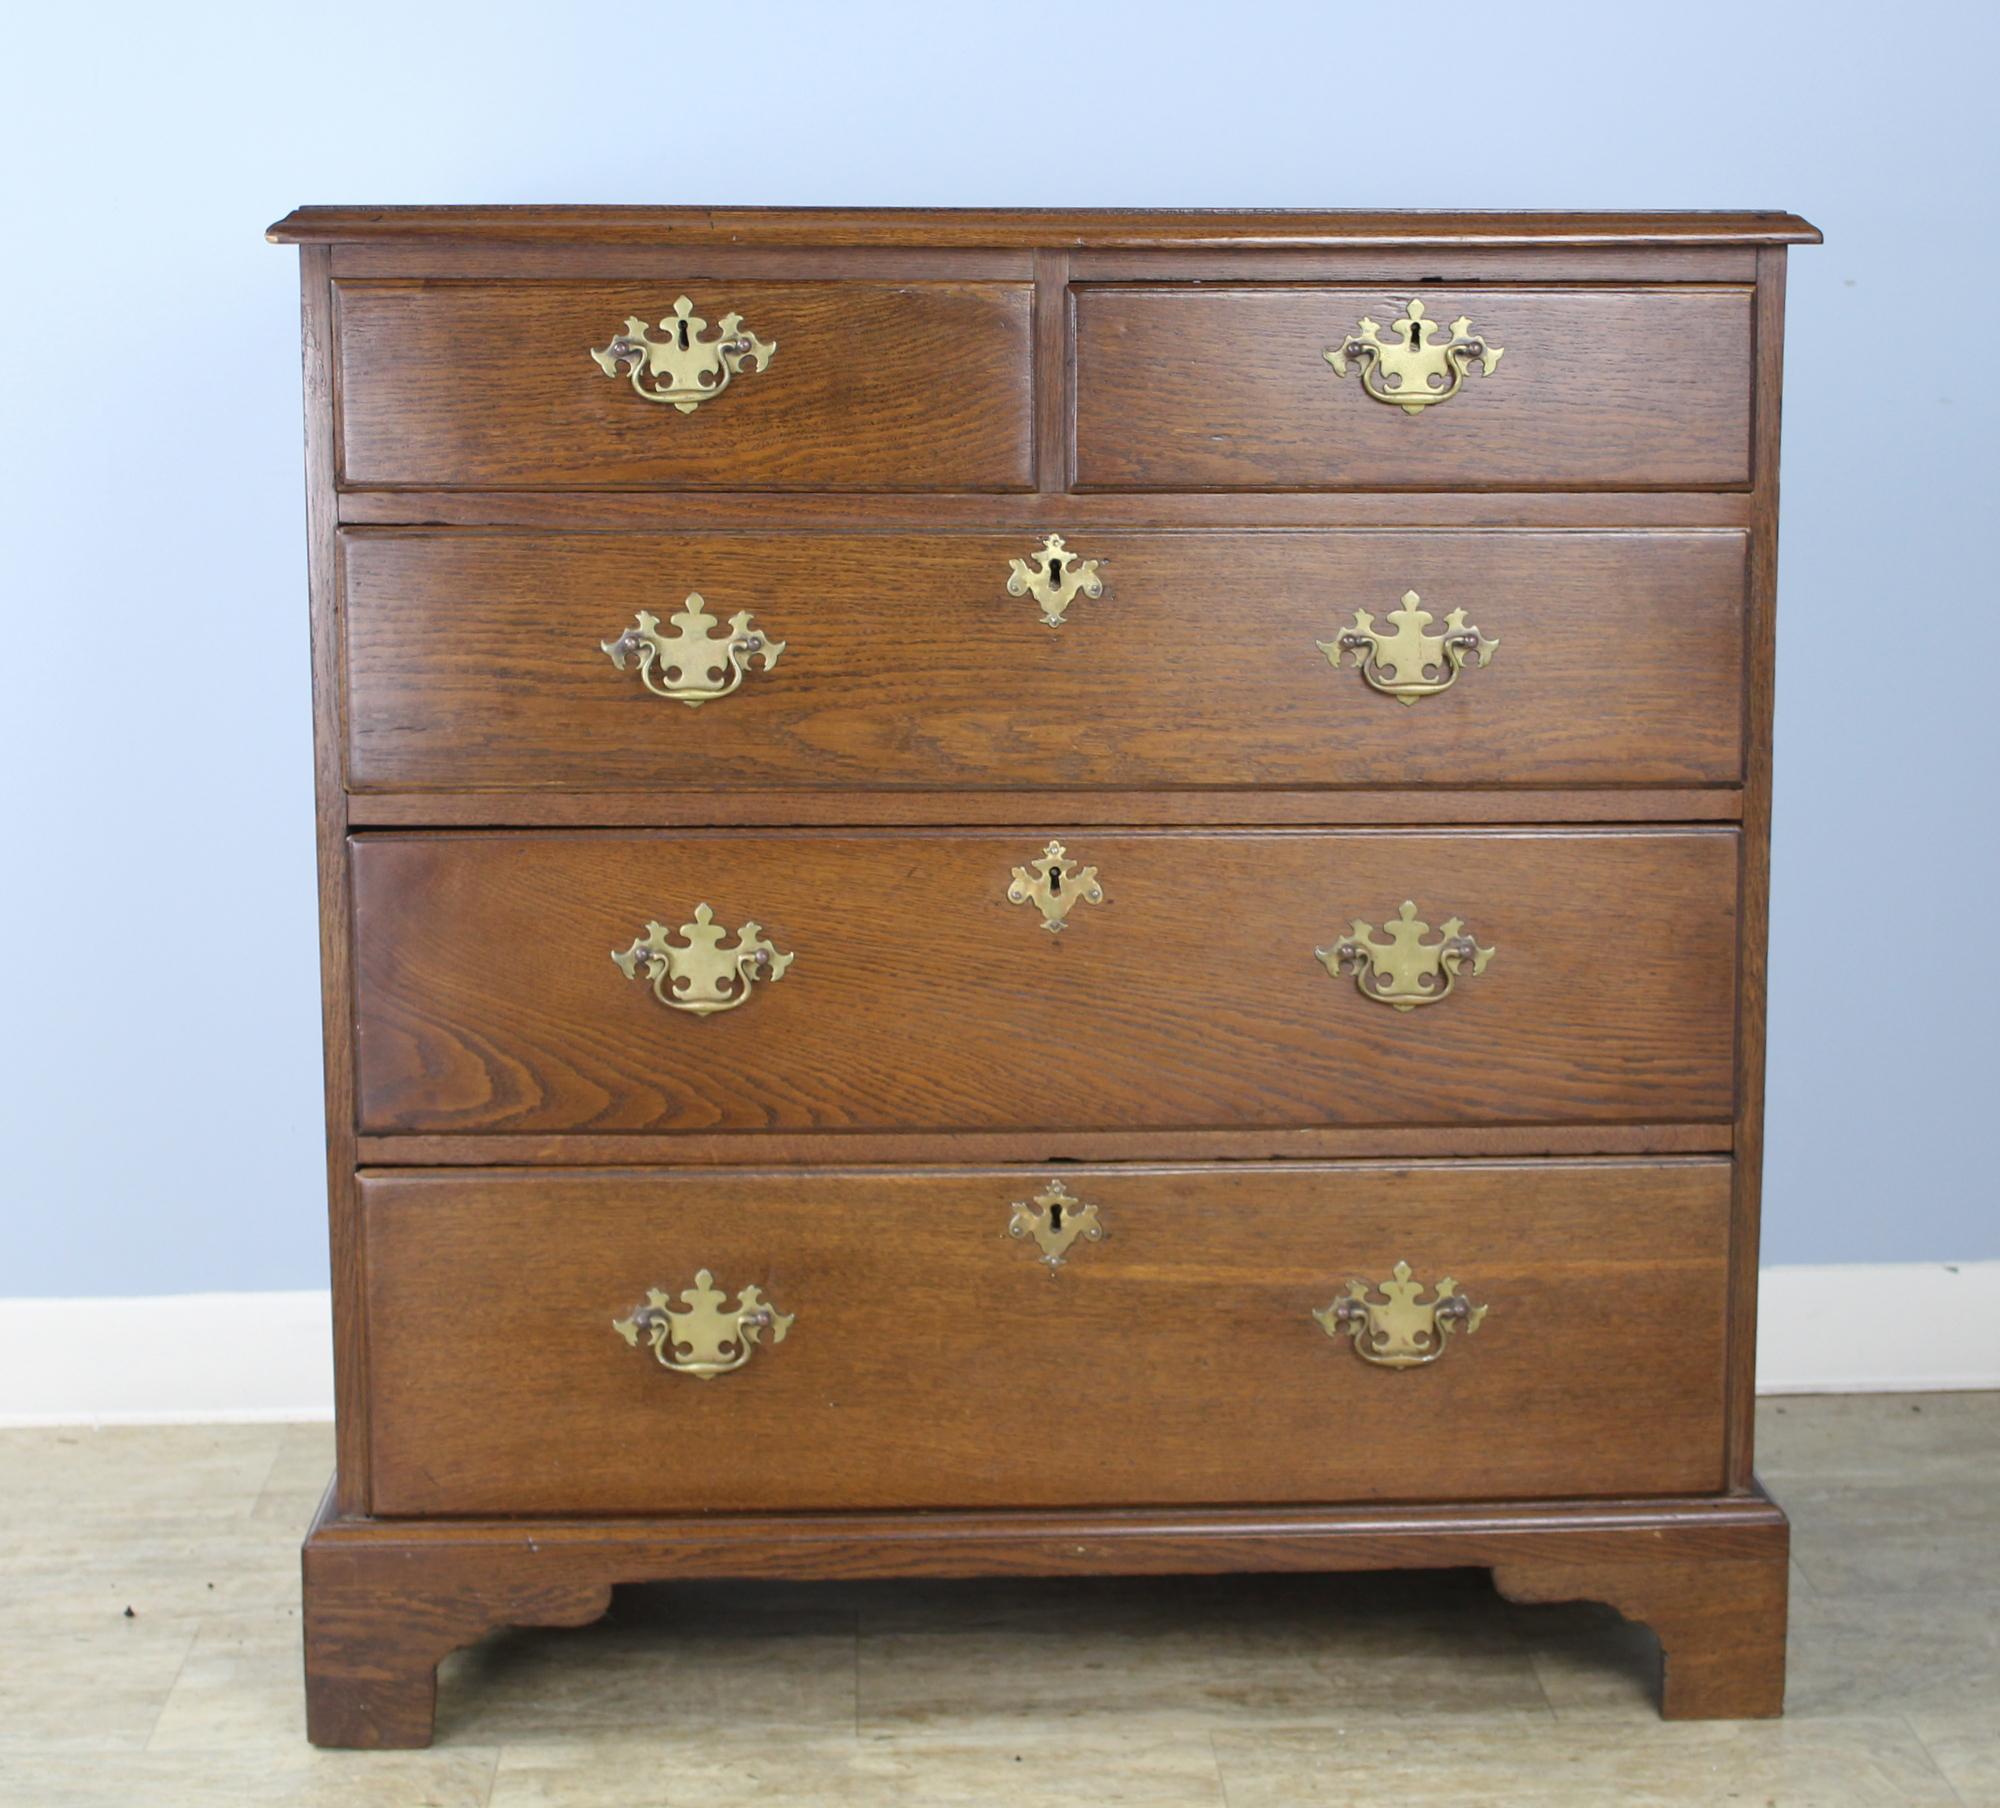 Beautiful original brasses are a highlight of this terrific early oak dresser. Two drawers over three make this a Classic and very attractive configuration. The smooth patinated top and the gentle ogee edge enhance the overall look. The bureau's